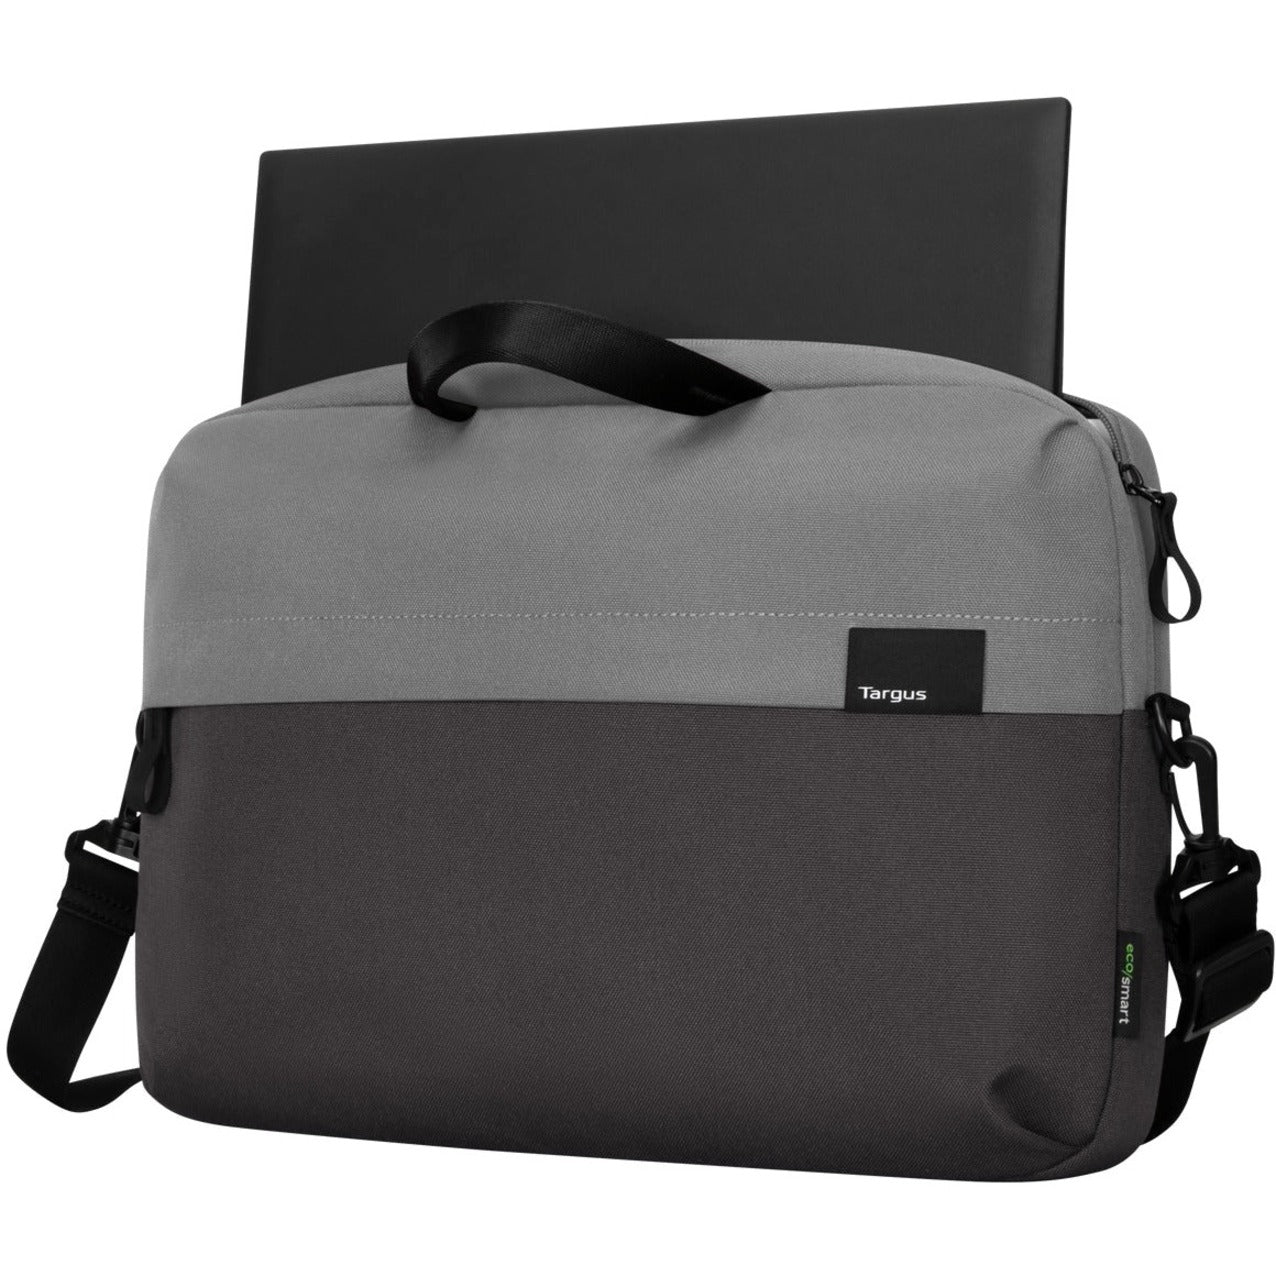 Targus Sagano EcoSmart TBS574GL Carrying Case (Slipcase) for 14" Notebook Smartphone Accessories - Black/Gray